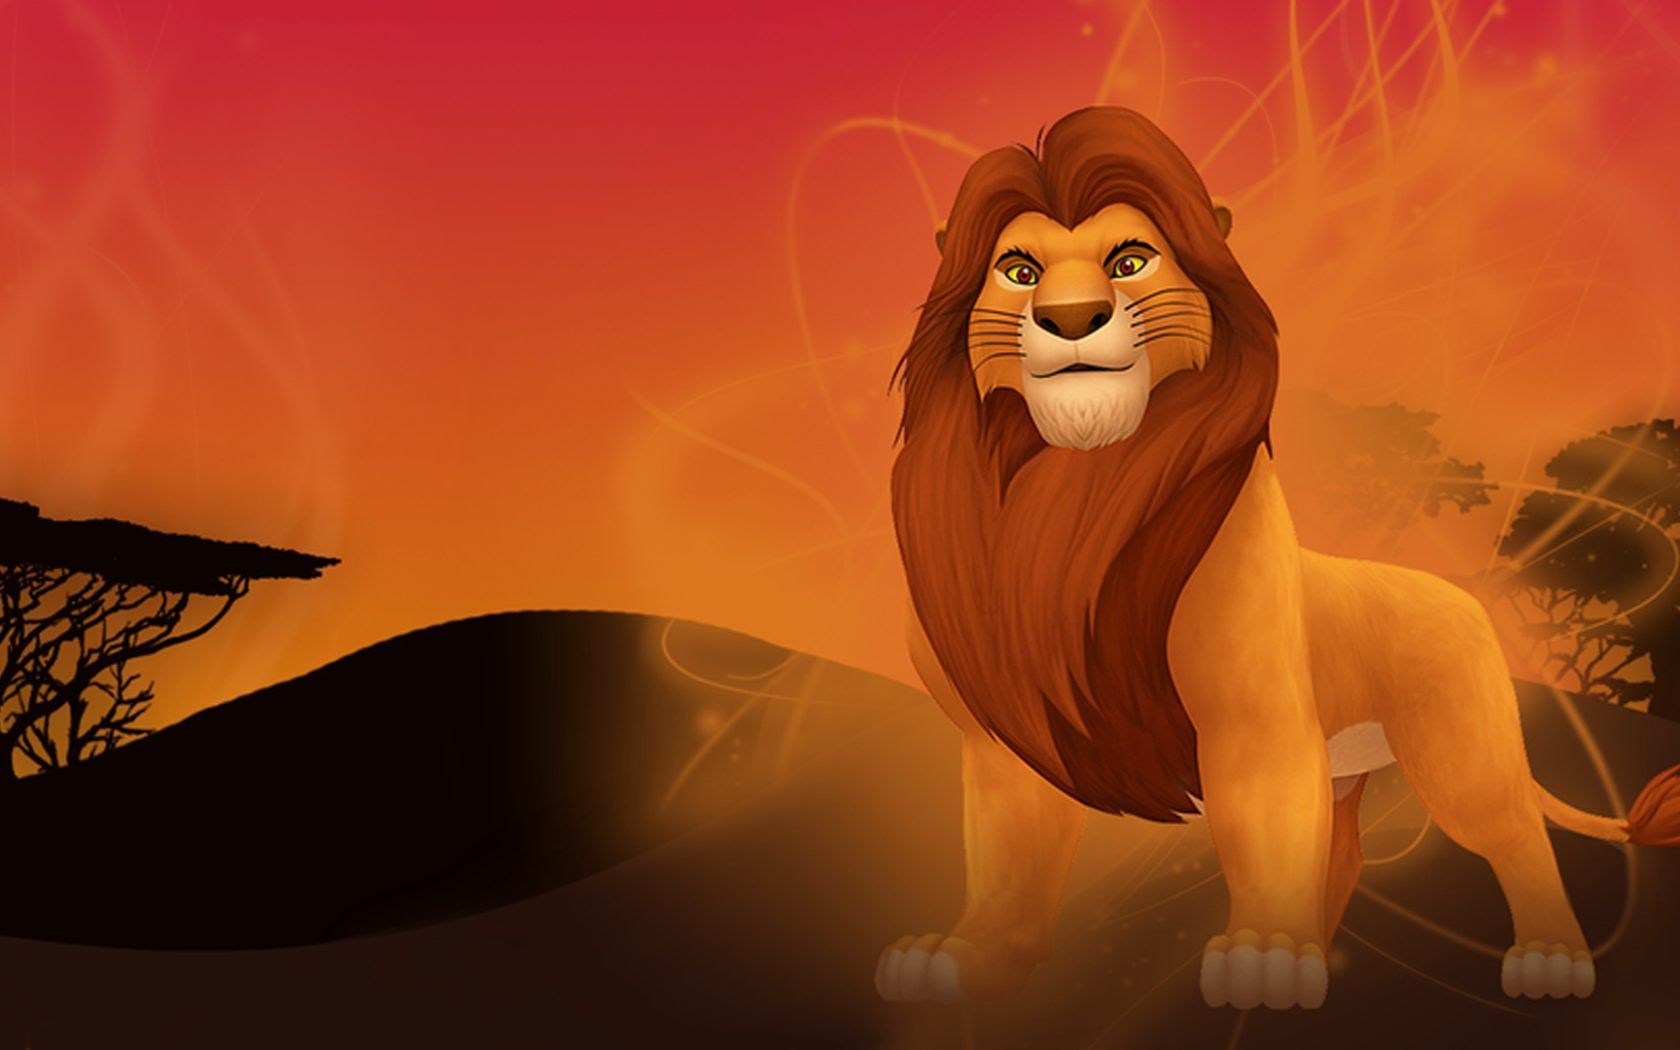 The Lion King is a 1994 American animated epic musical film produced by Walt Disney Feature Animation. - The Lion King